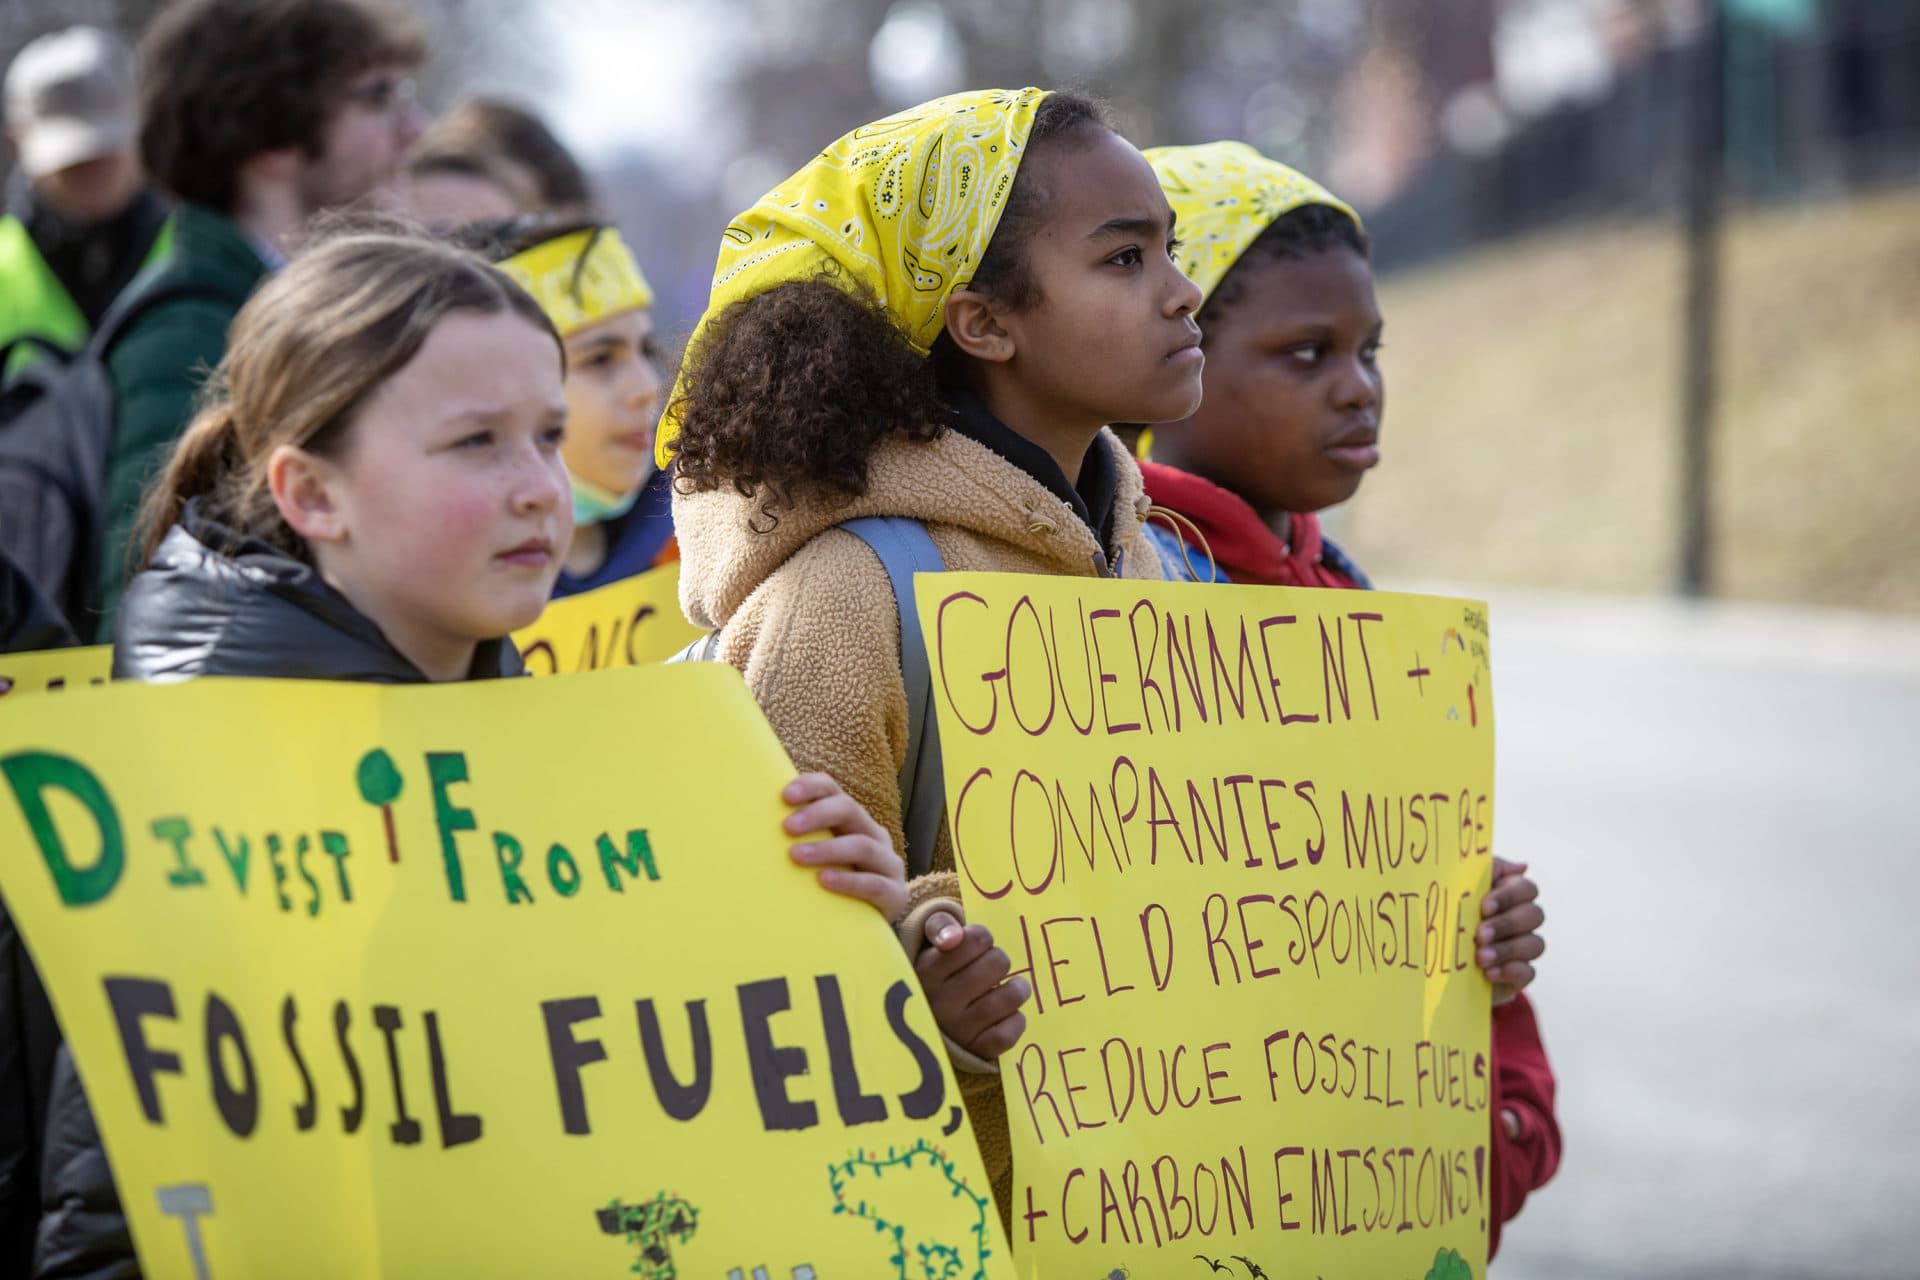 Students from the Neighborhood School in Jamaica Plain listen to speakers at the Fridays For Future protest at the State House. (Credit: Robin Lubbock/WBUR)